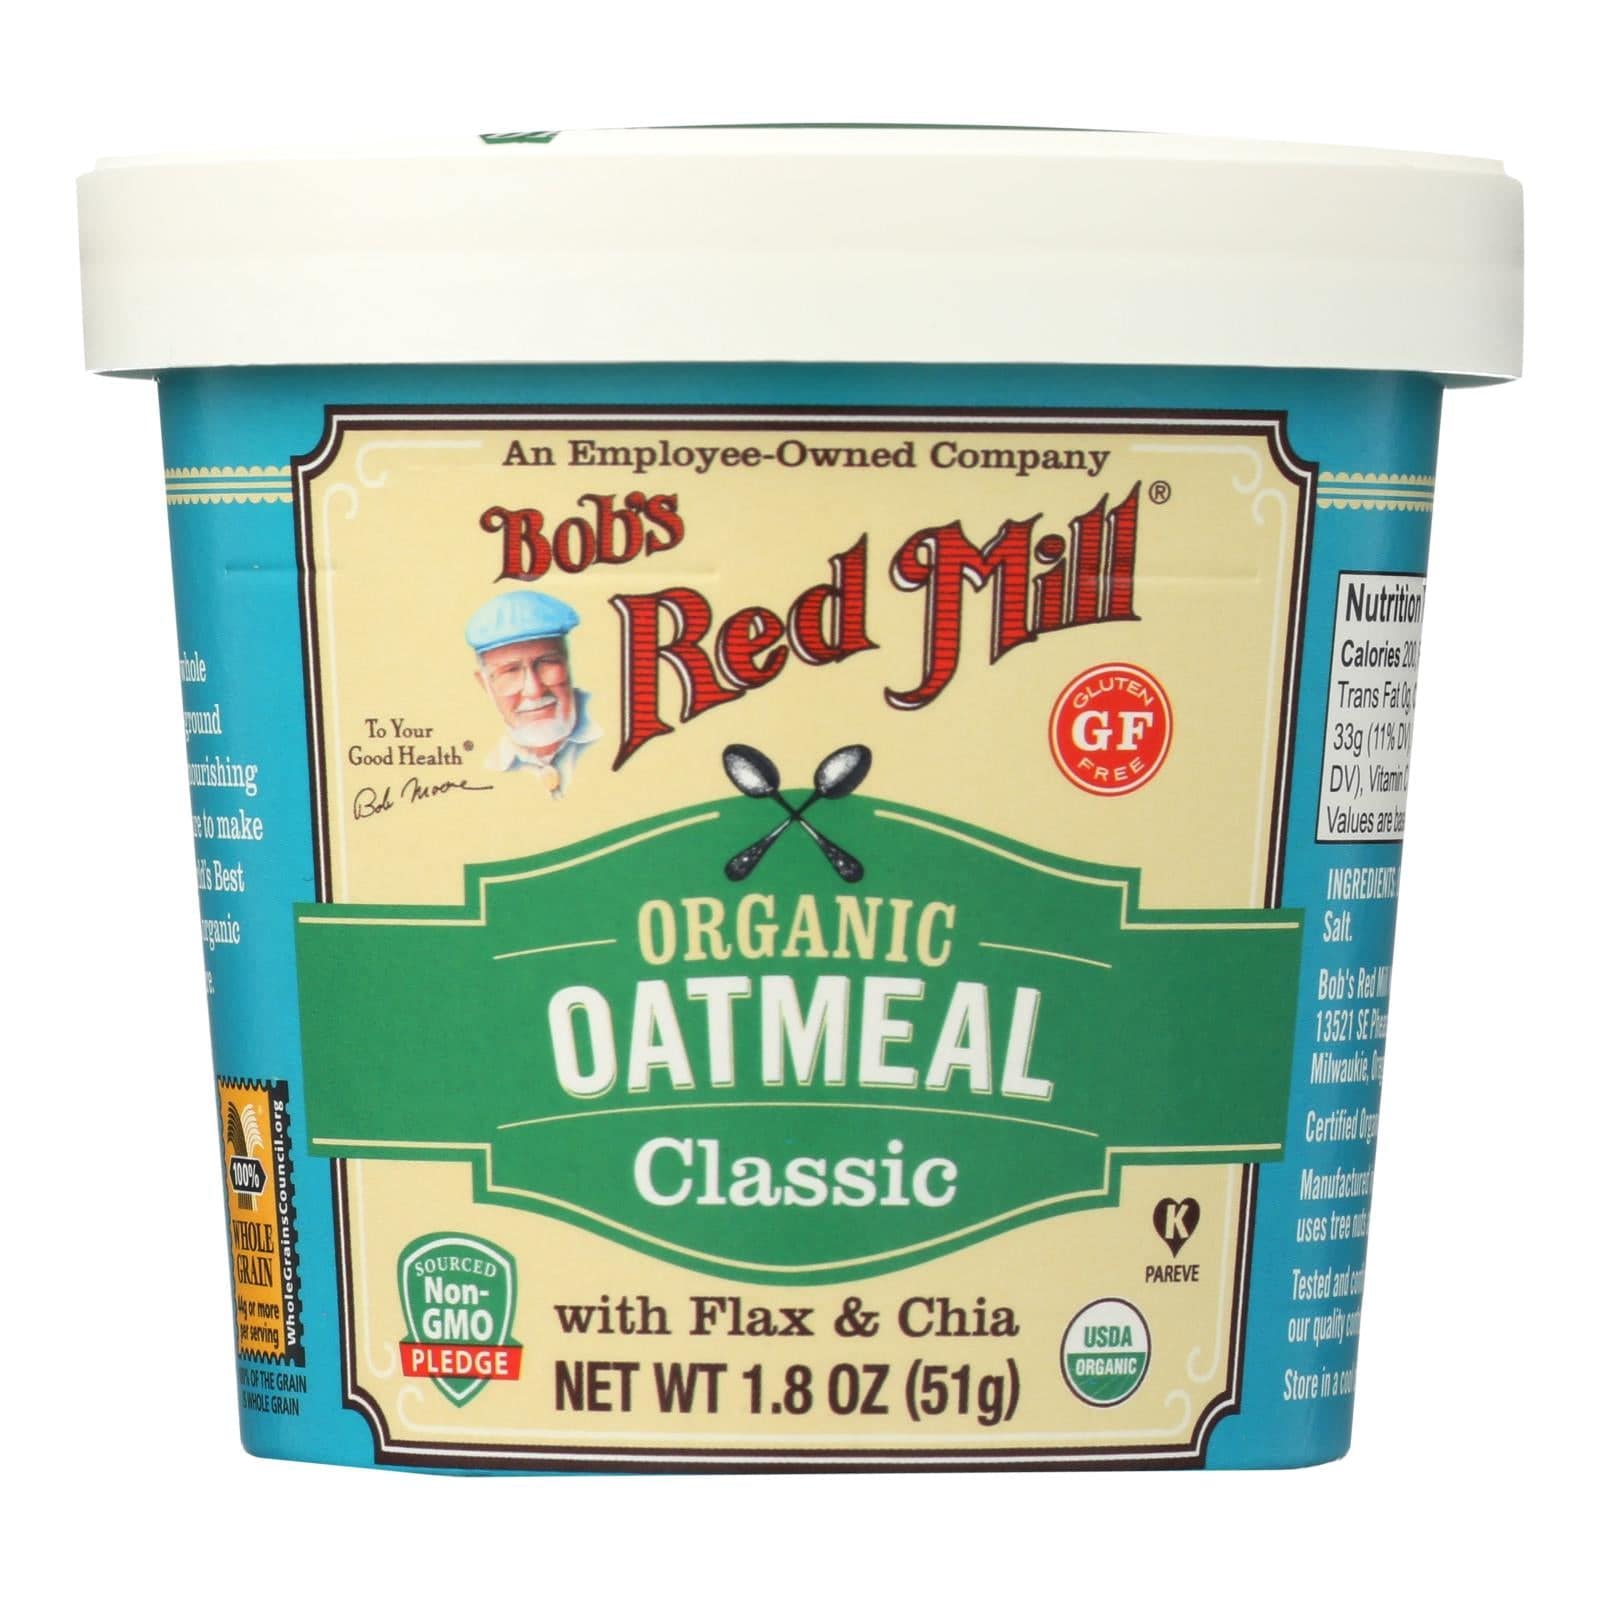 Bob's Red Mill - Oatmeal - Organic - Cup - Classc - Gluten Free - Case Of 12 - 1.8 Oz | OnlyNaturals.us